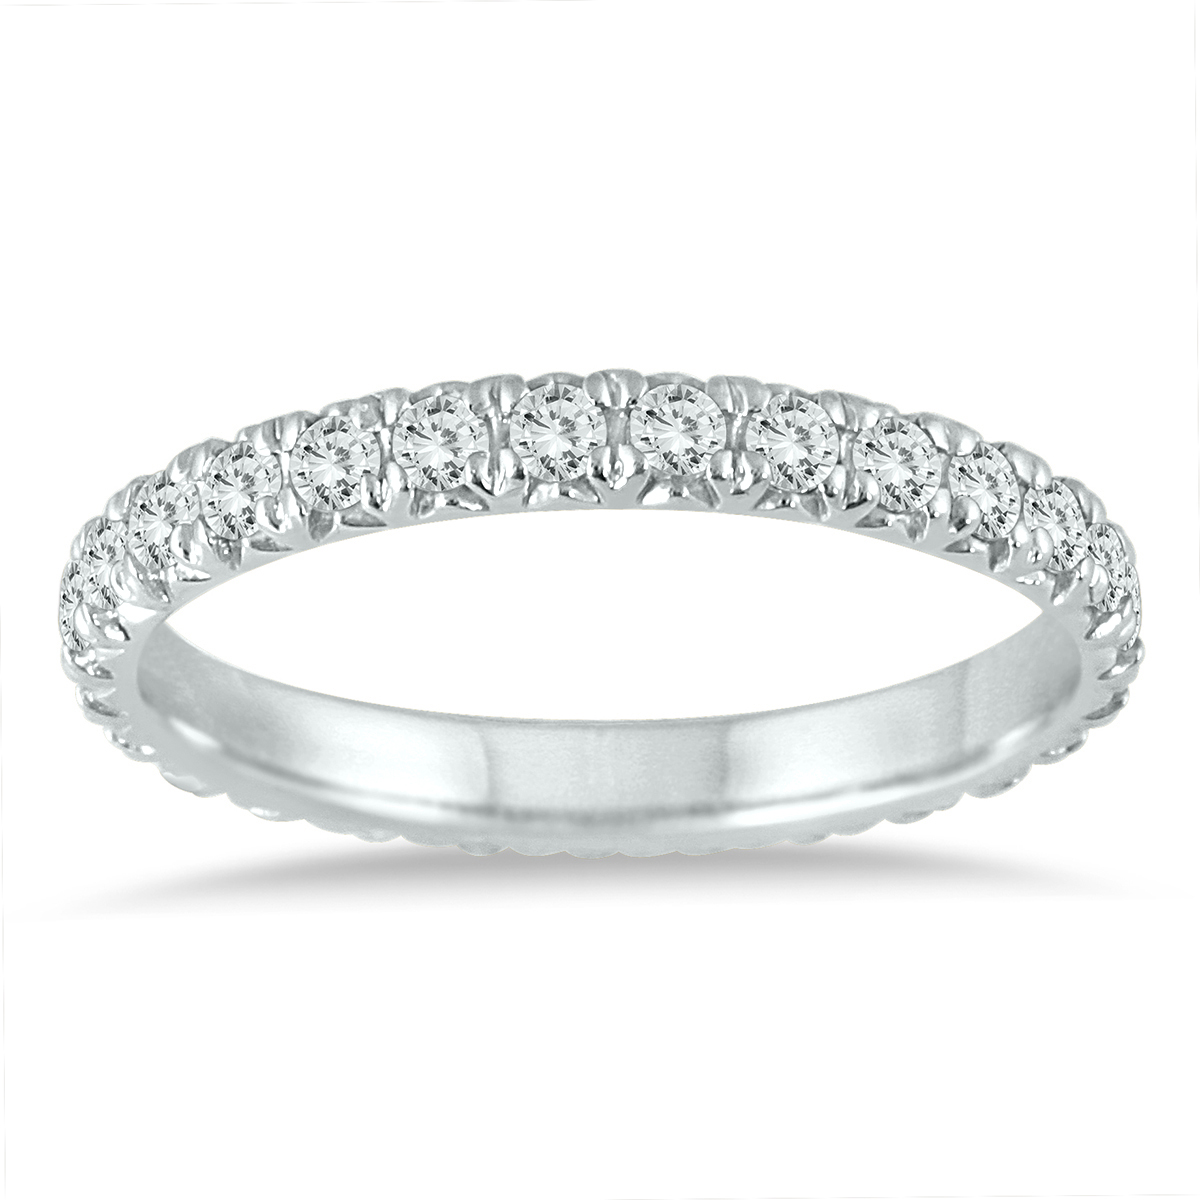 1 1/2 Carat TW Shared Prong Diamond Eternity Band in 10K White Gold